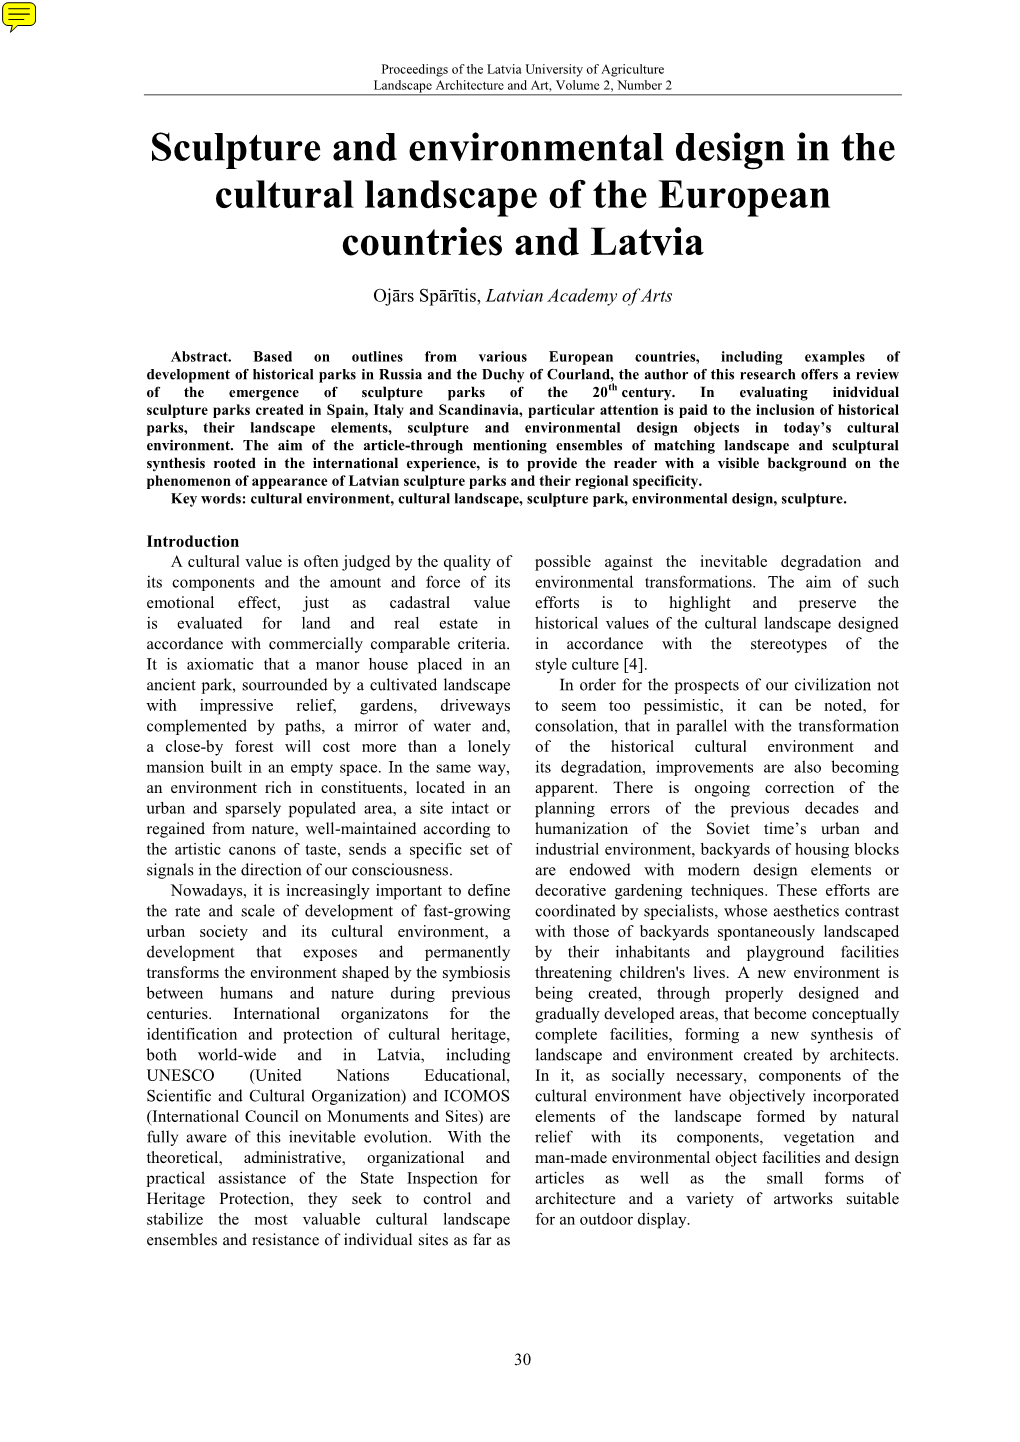 Sculpture and Environmental Design in the Cultural Landscape of the European Countries and Latvia